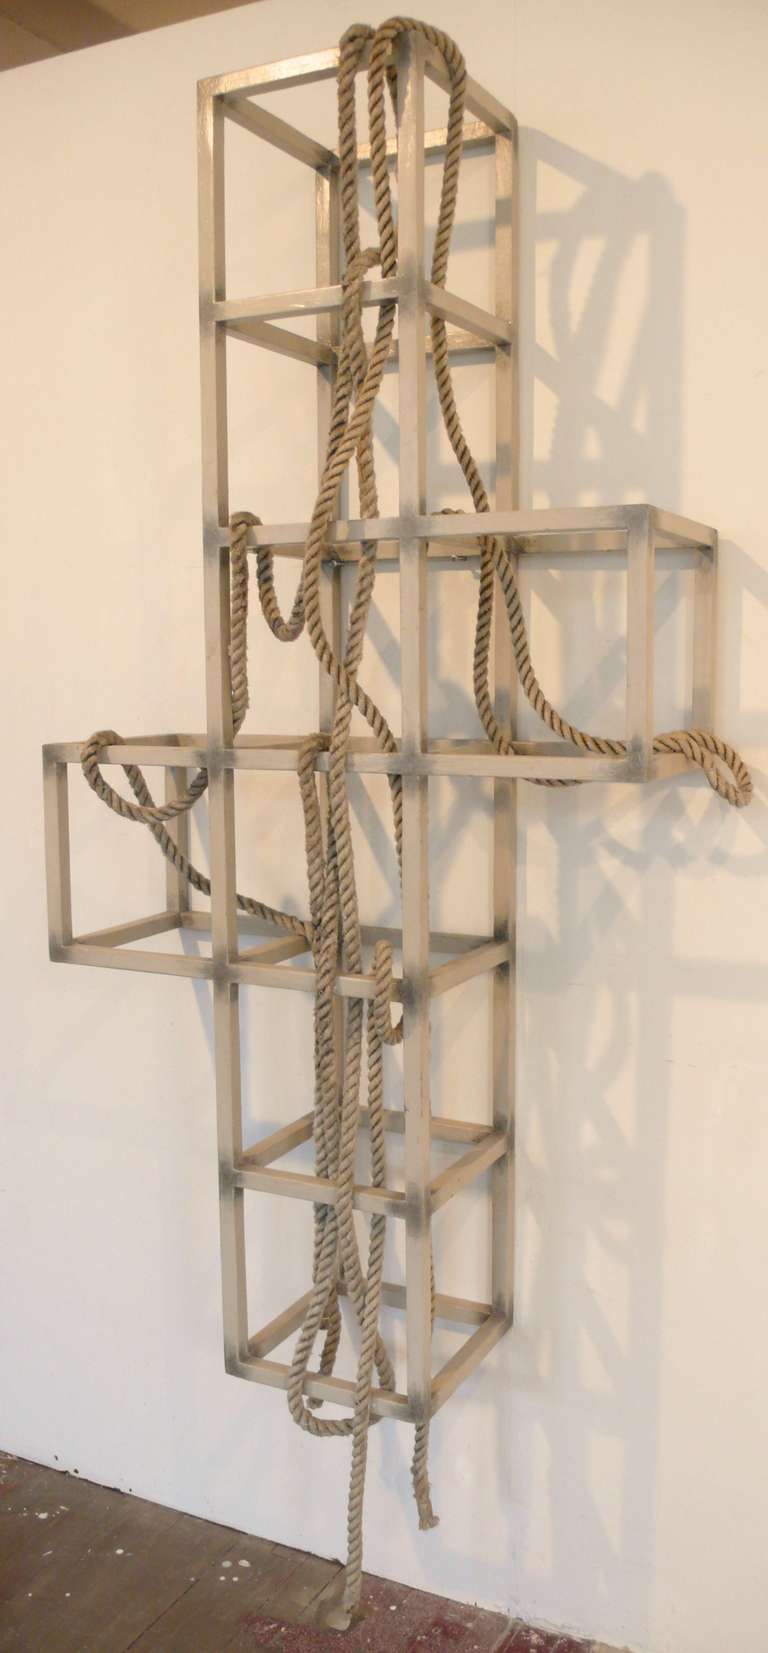 Wall-mounted sculpture by NYC artist Gabriele Roos, executed c. 2000. Roos studied art at the Cooper Union (BA,1953), the Art Institute of Chicago (BFA, 1956), and the Universtiry of Michigan (MFA, 1958) before completing her studies at NYU. She has